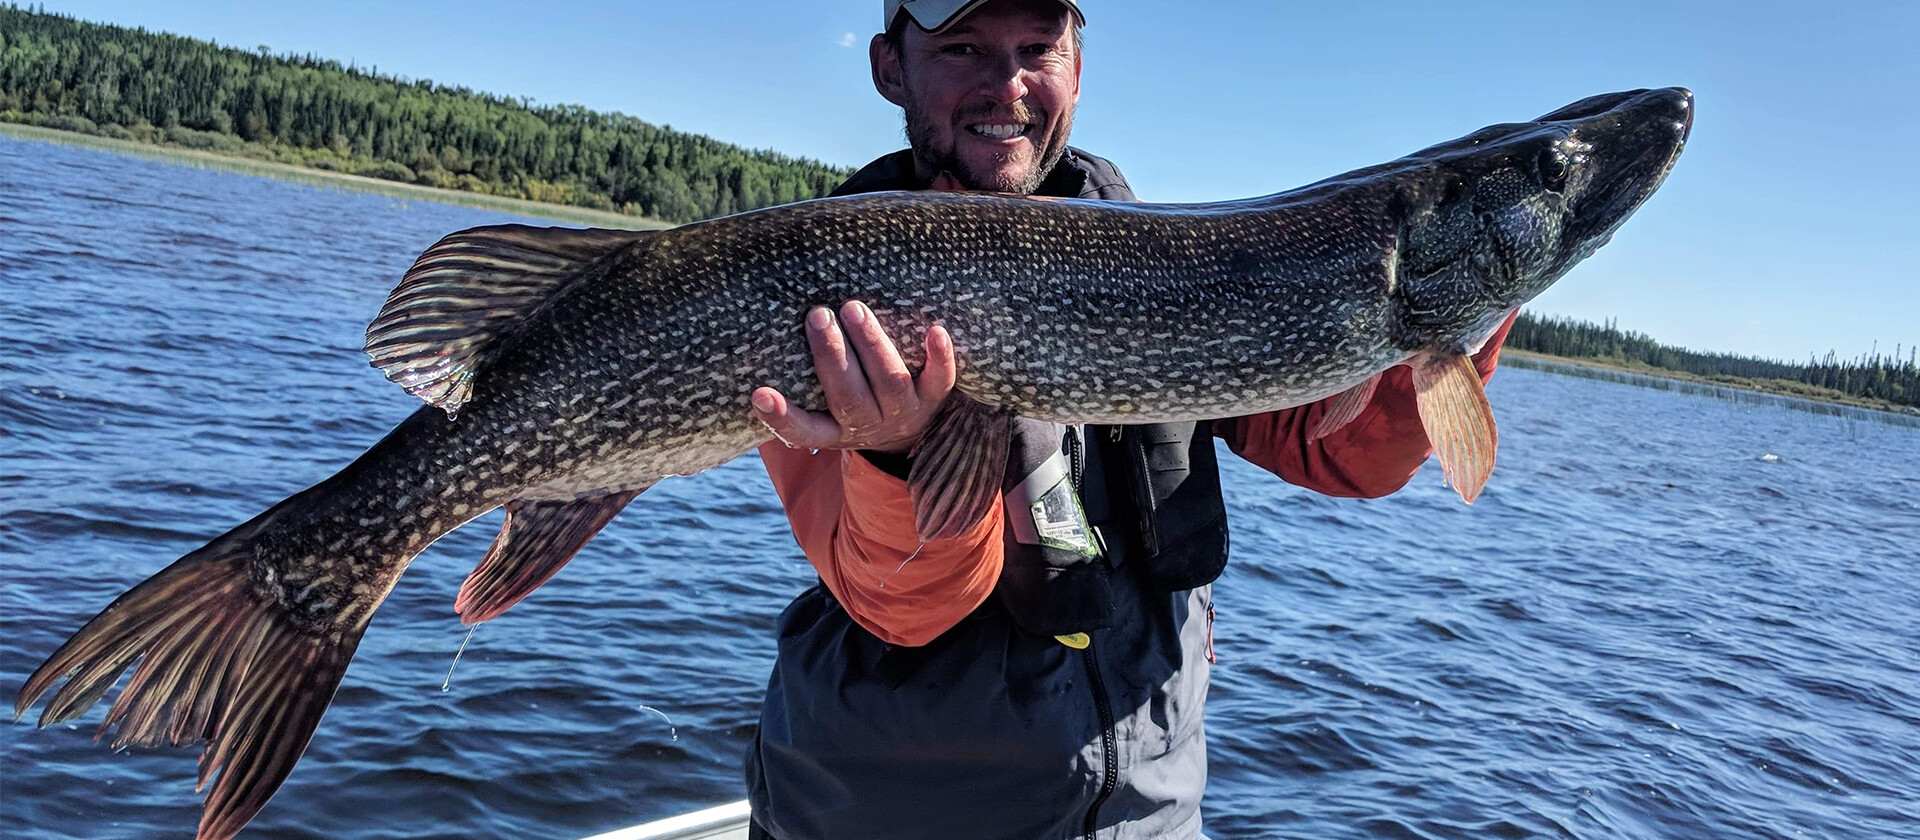 The Gear You Need to Go Fishing for Northern Pike in Ontario